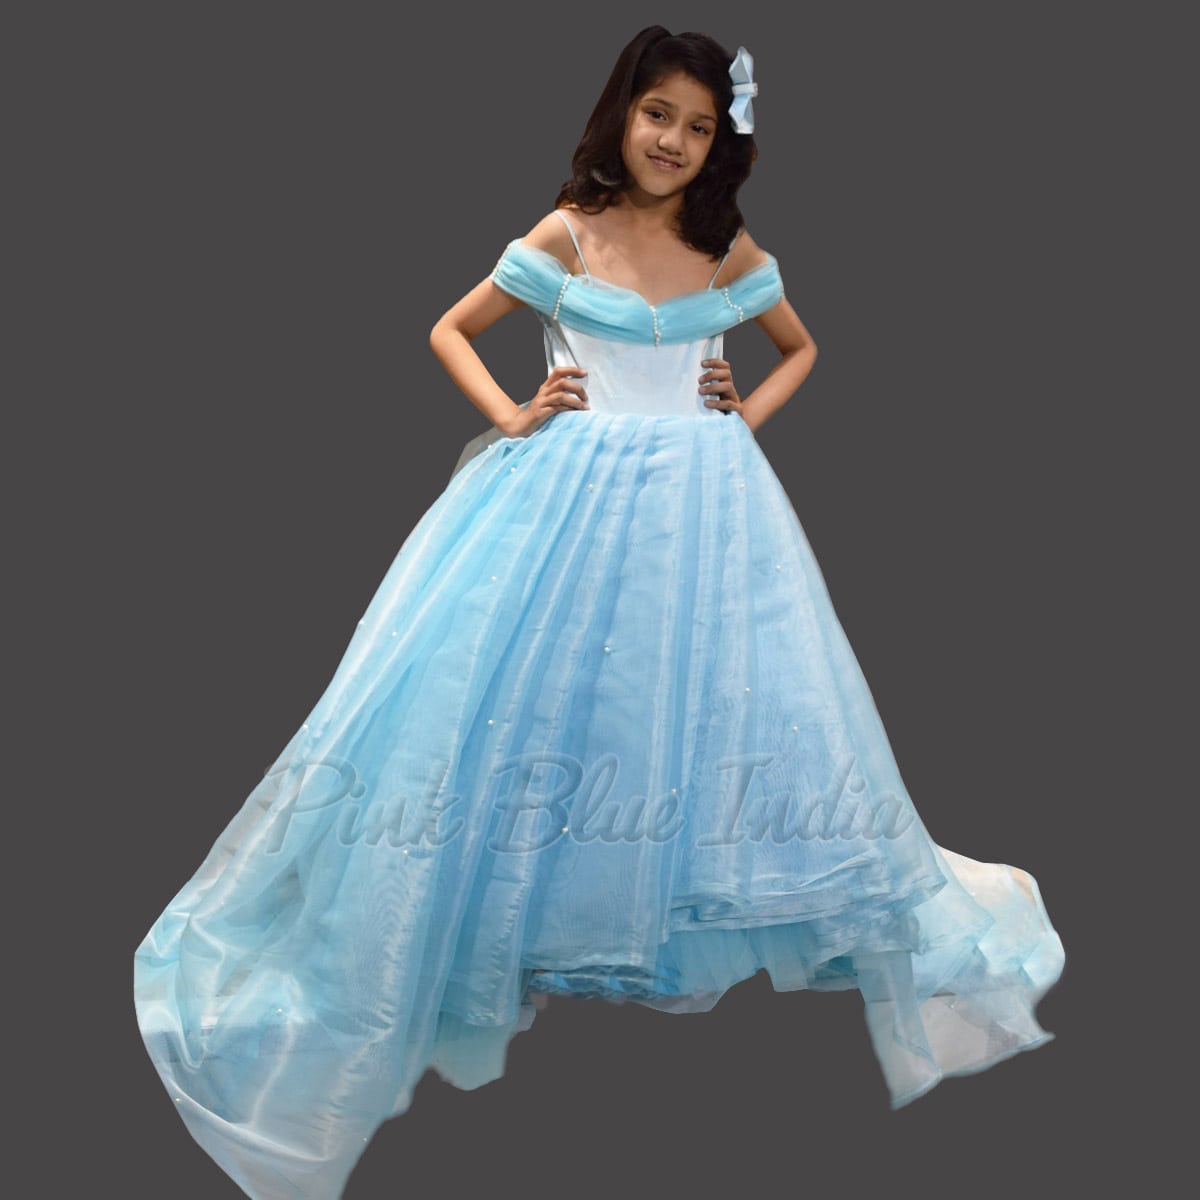 Custom made Frozen / Queen Elsa inspired ballgown style dress /costume -  The Design the Stitch and the Wardrobe